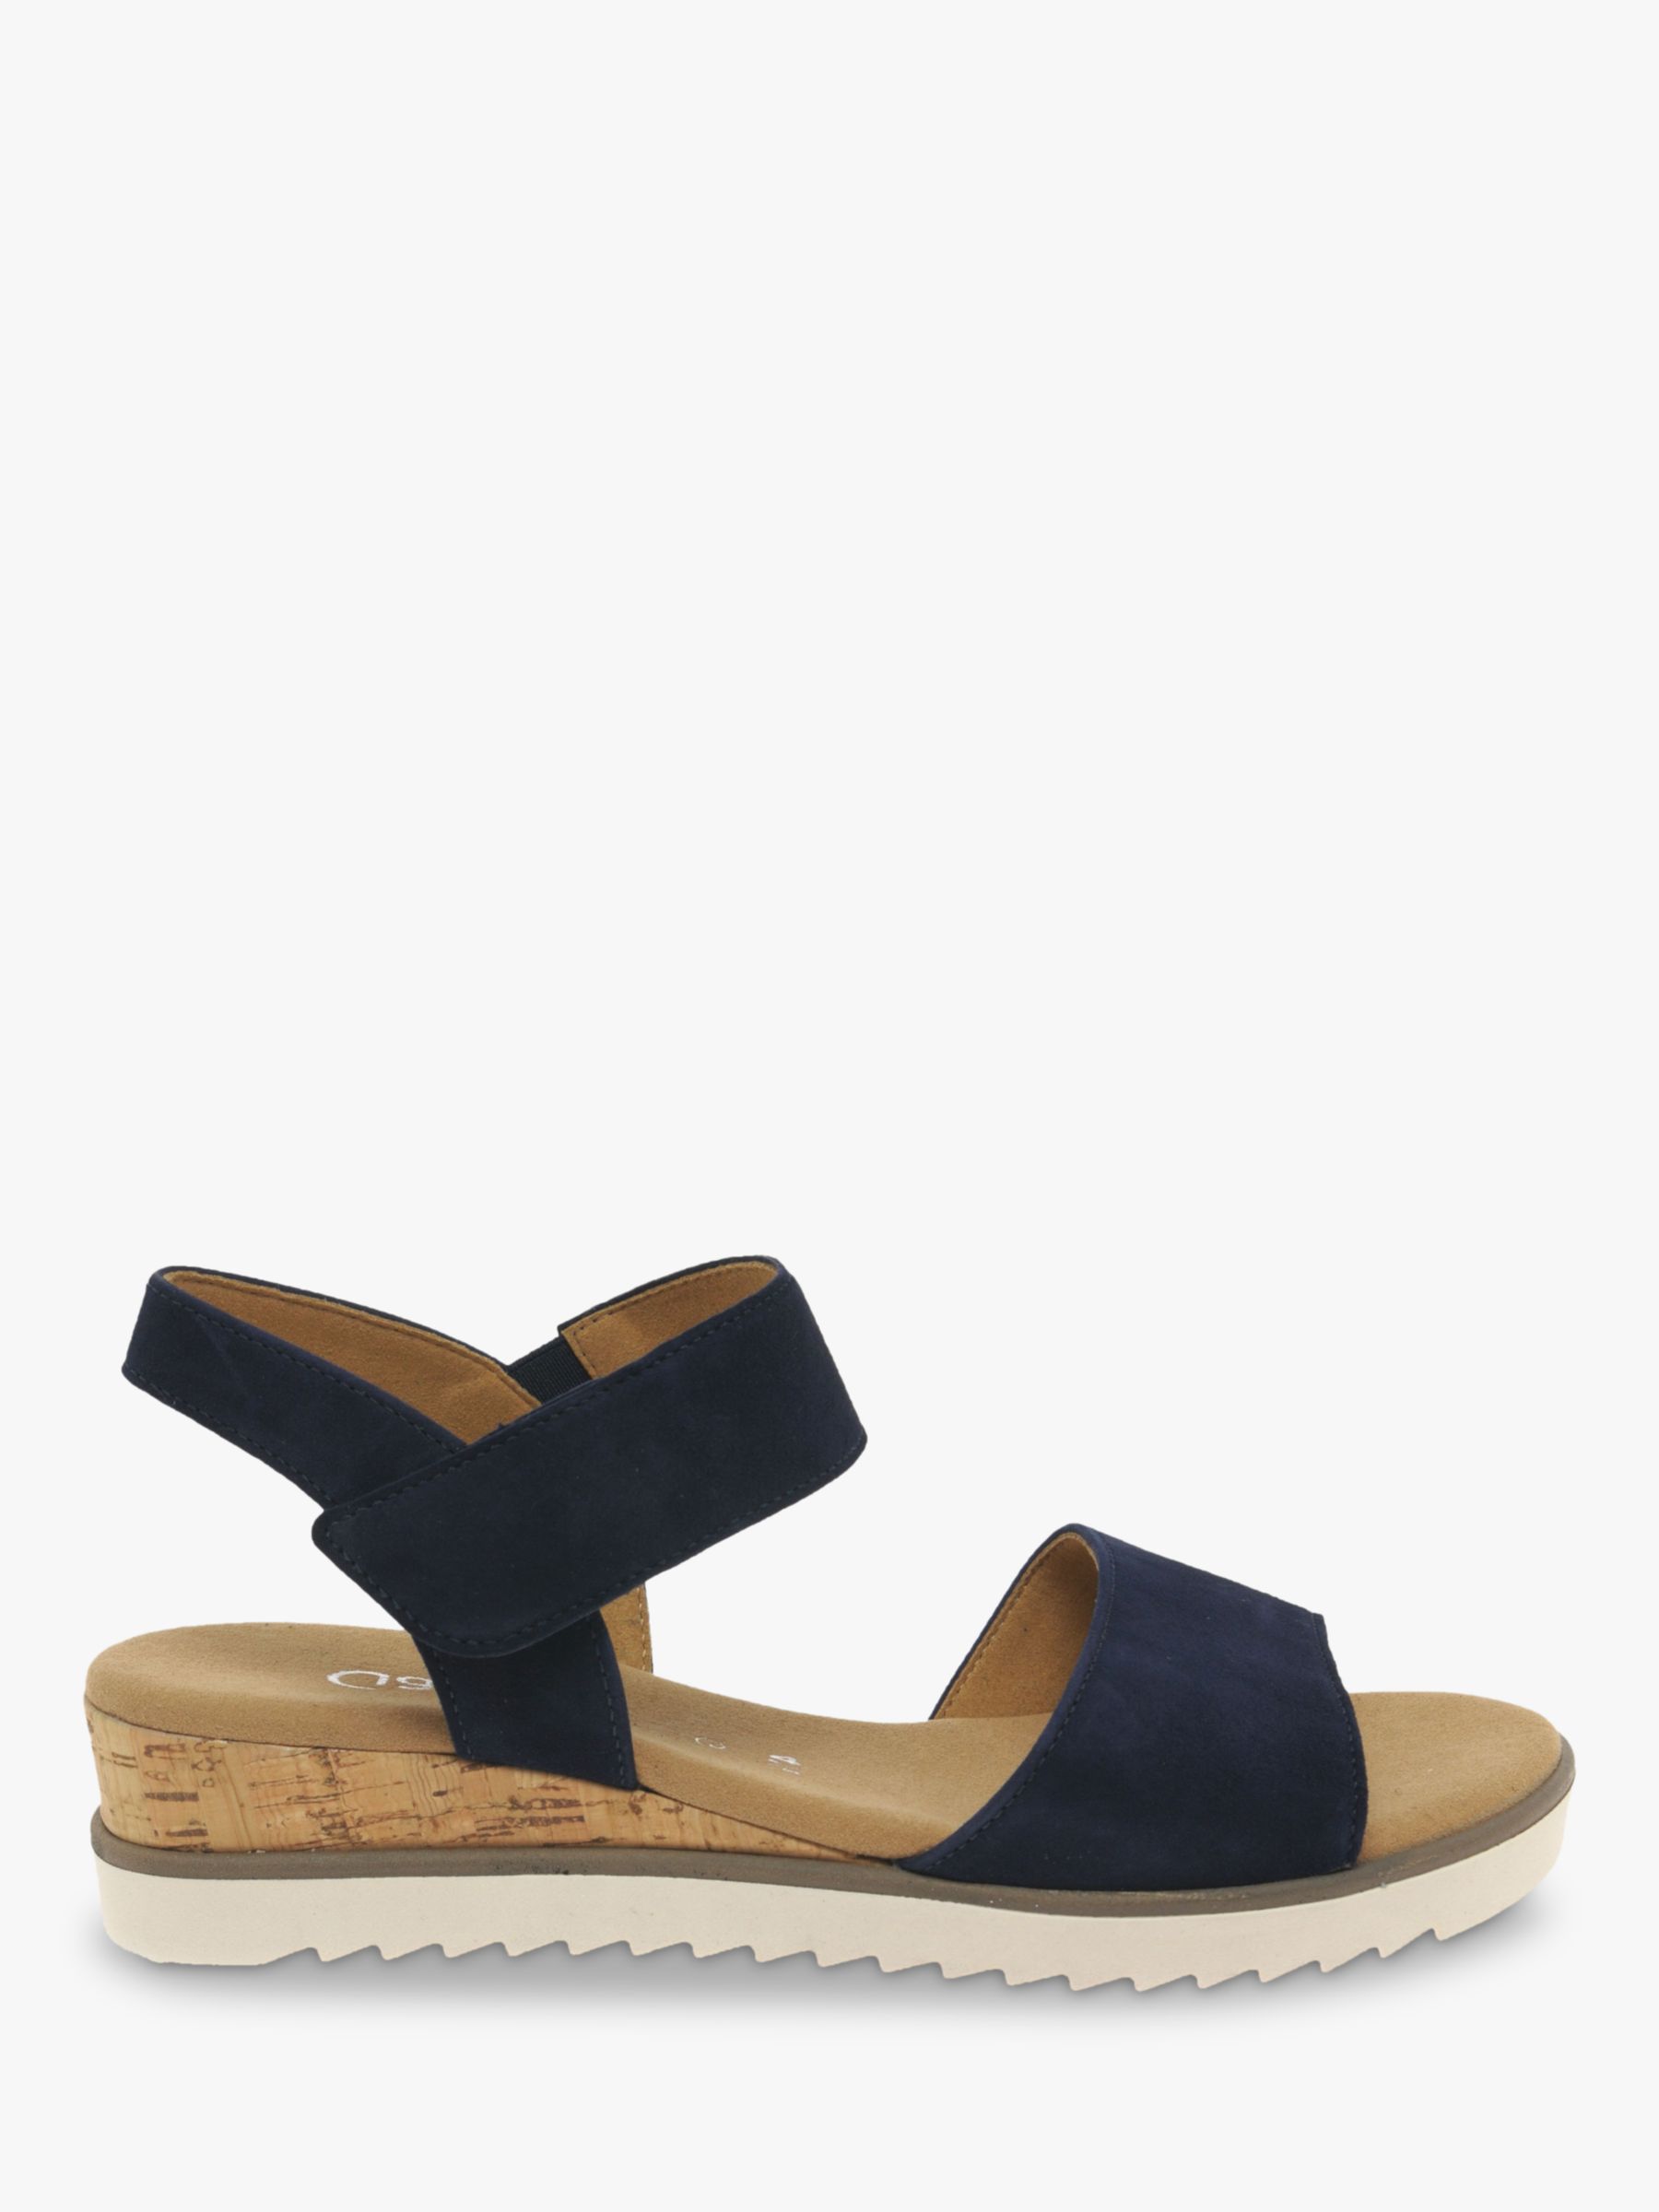 Gabor Raynor Suede Wide Fit Sandals, Lewis & Partners